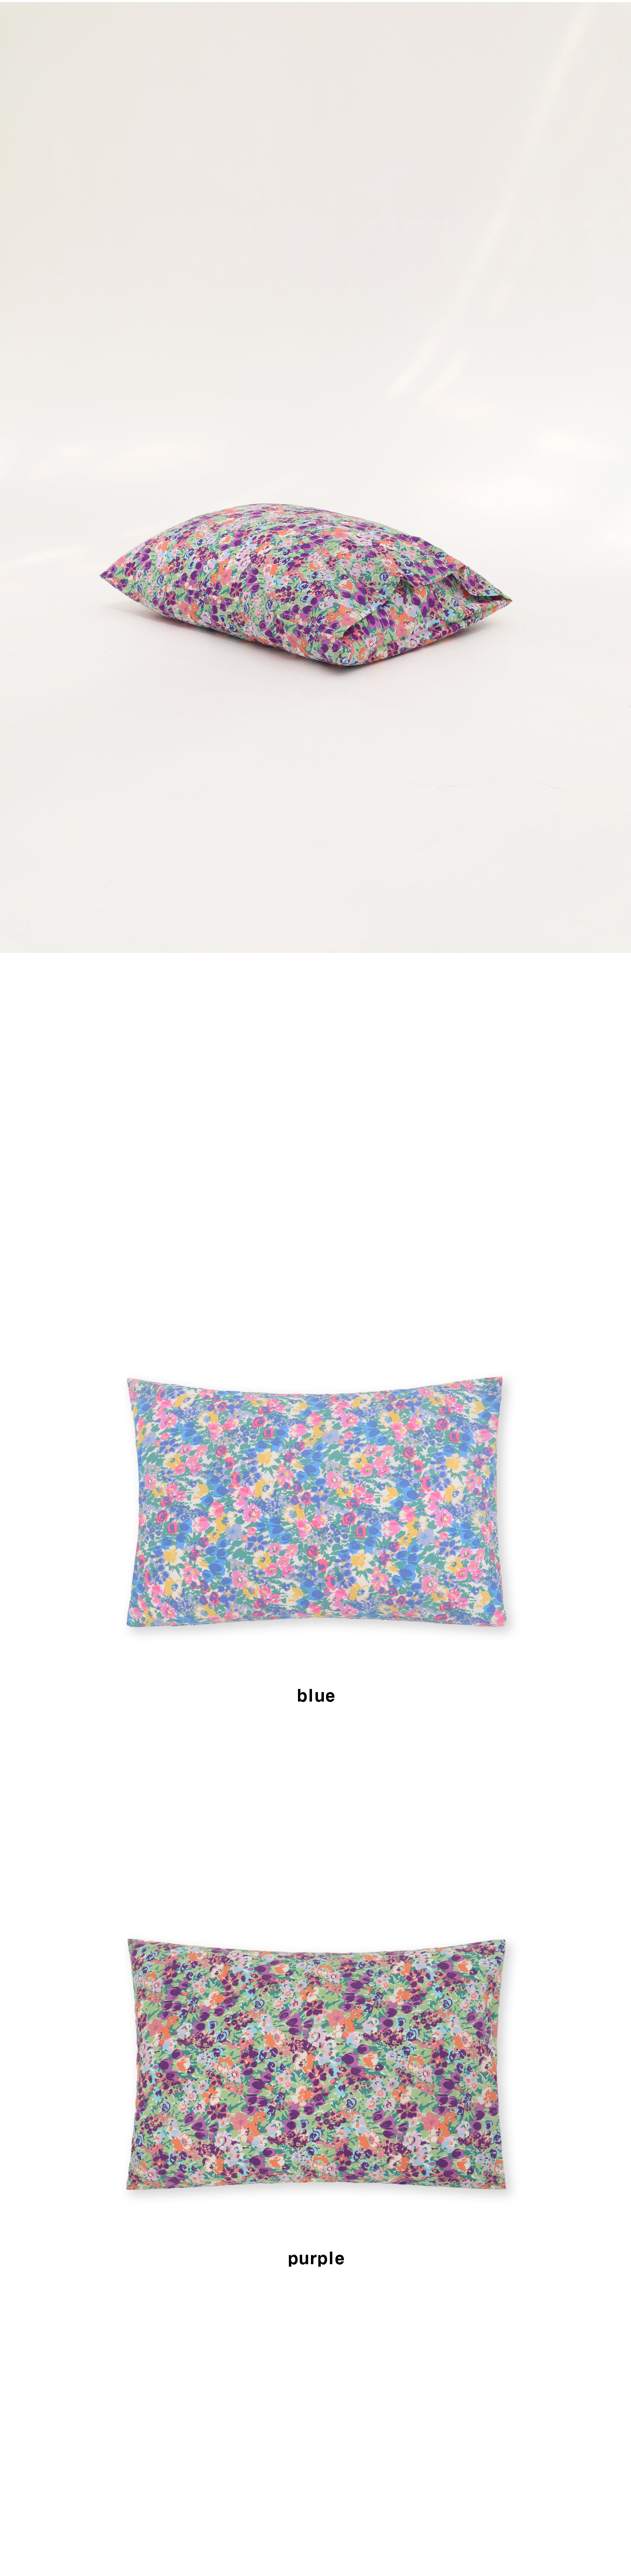 French flower pillow case(2color)